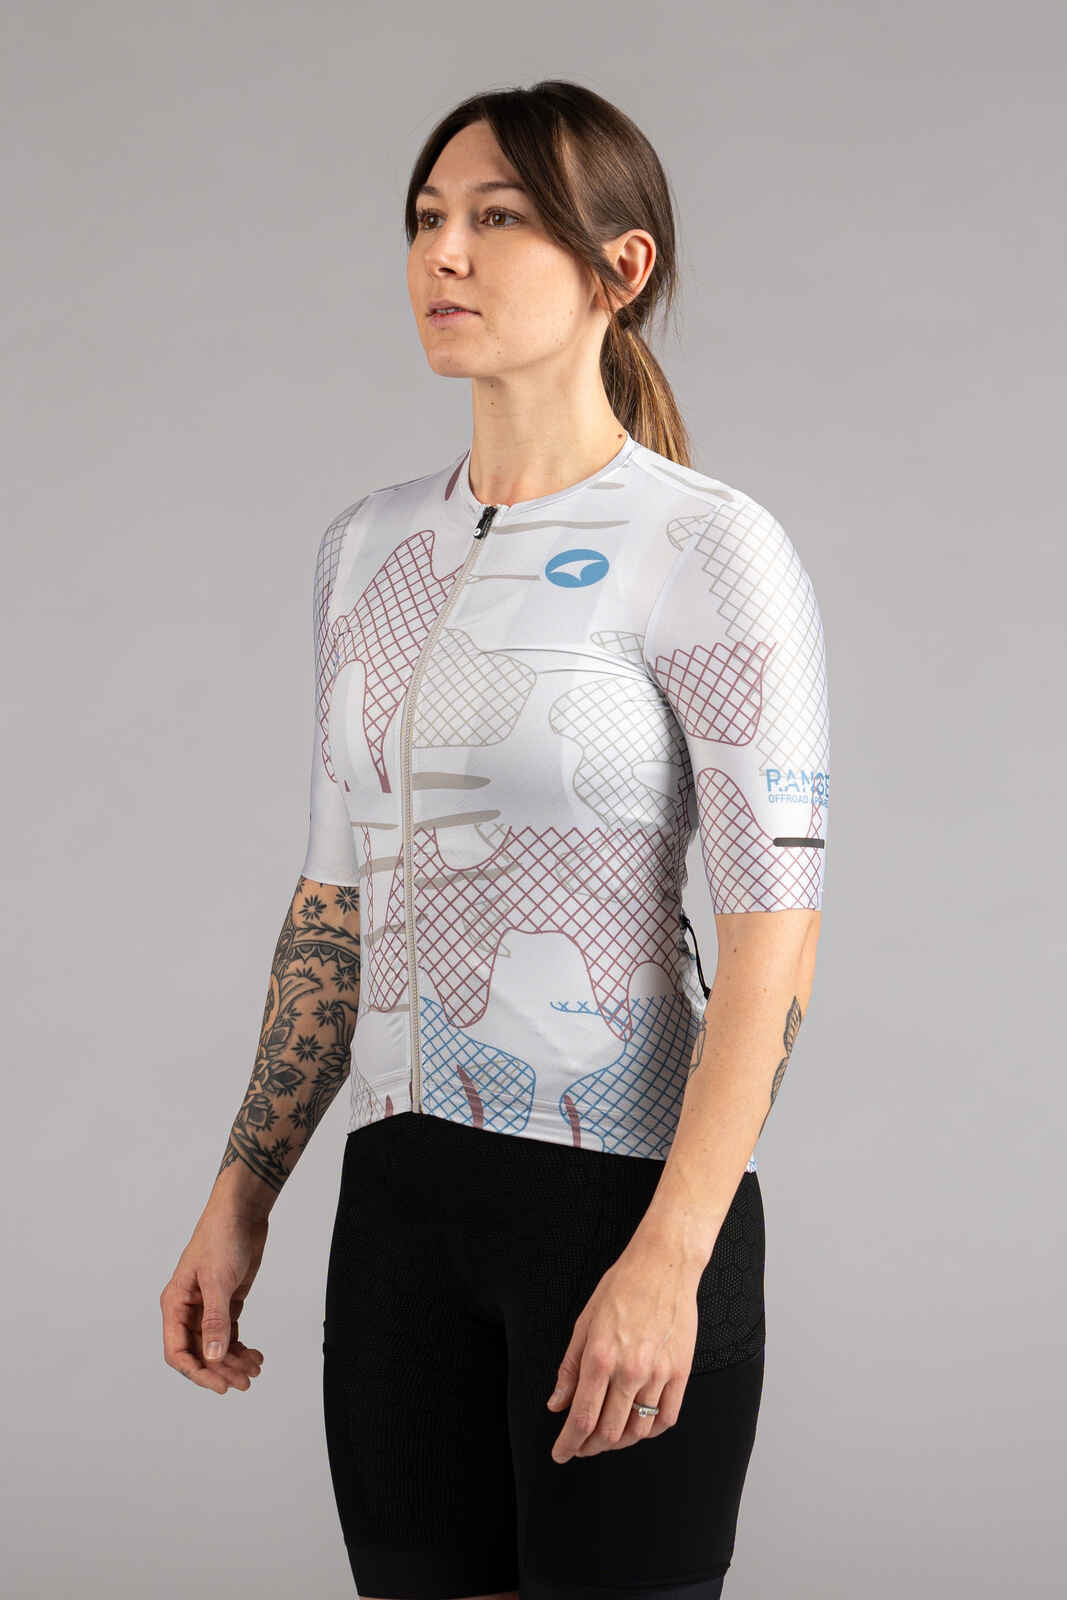 Women's White Gravel Cycling Jersey - Front View